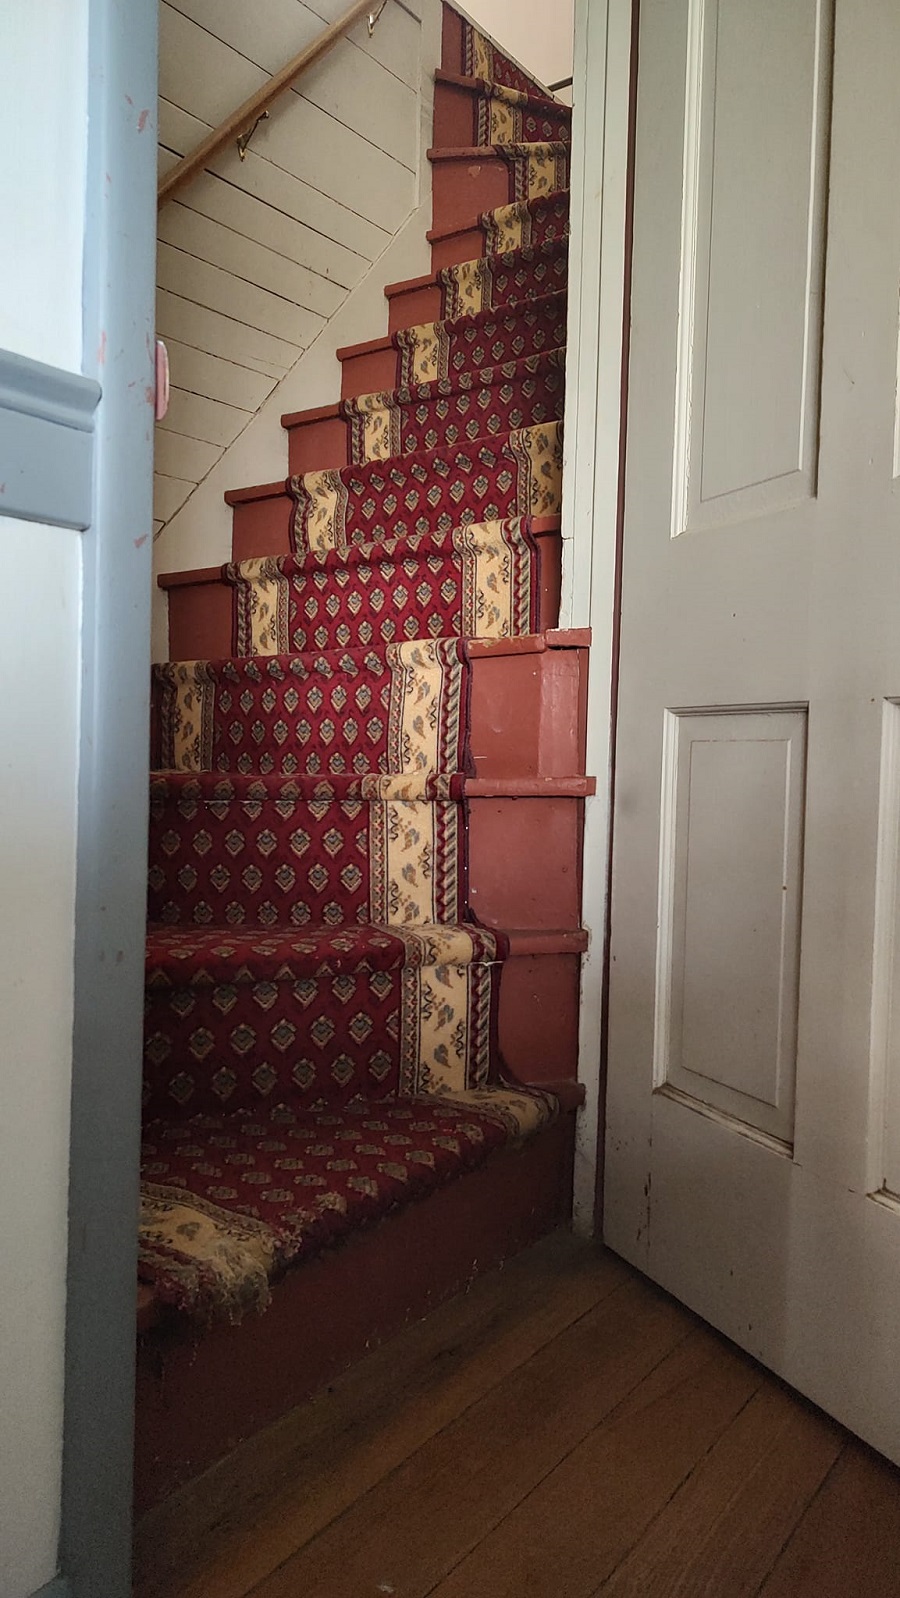 I Live In A House Built Sometime Before 1855. These Are The Only Stairs From The First Floor To The Second Floor